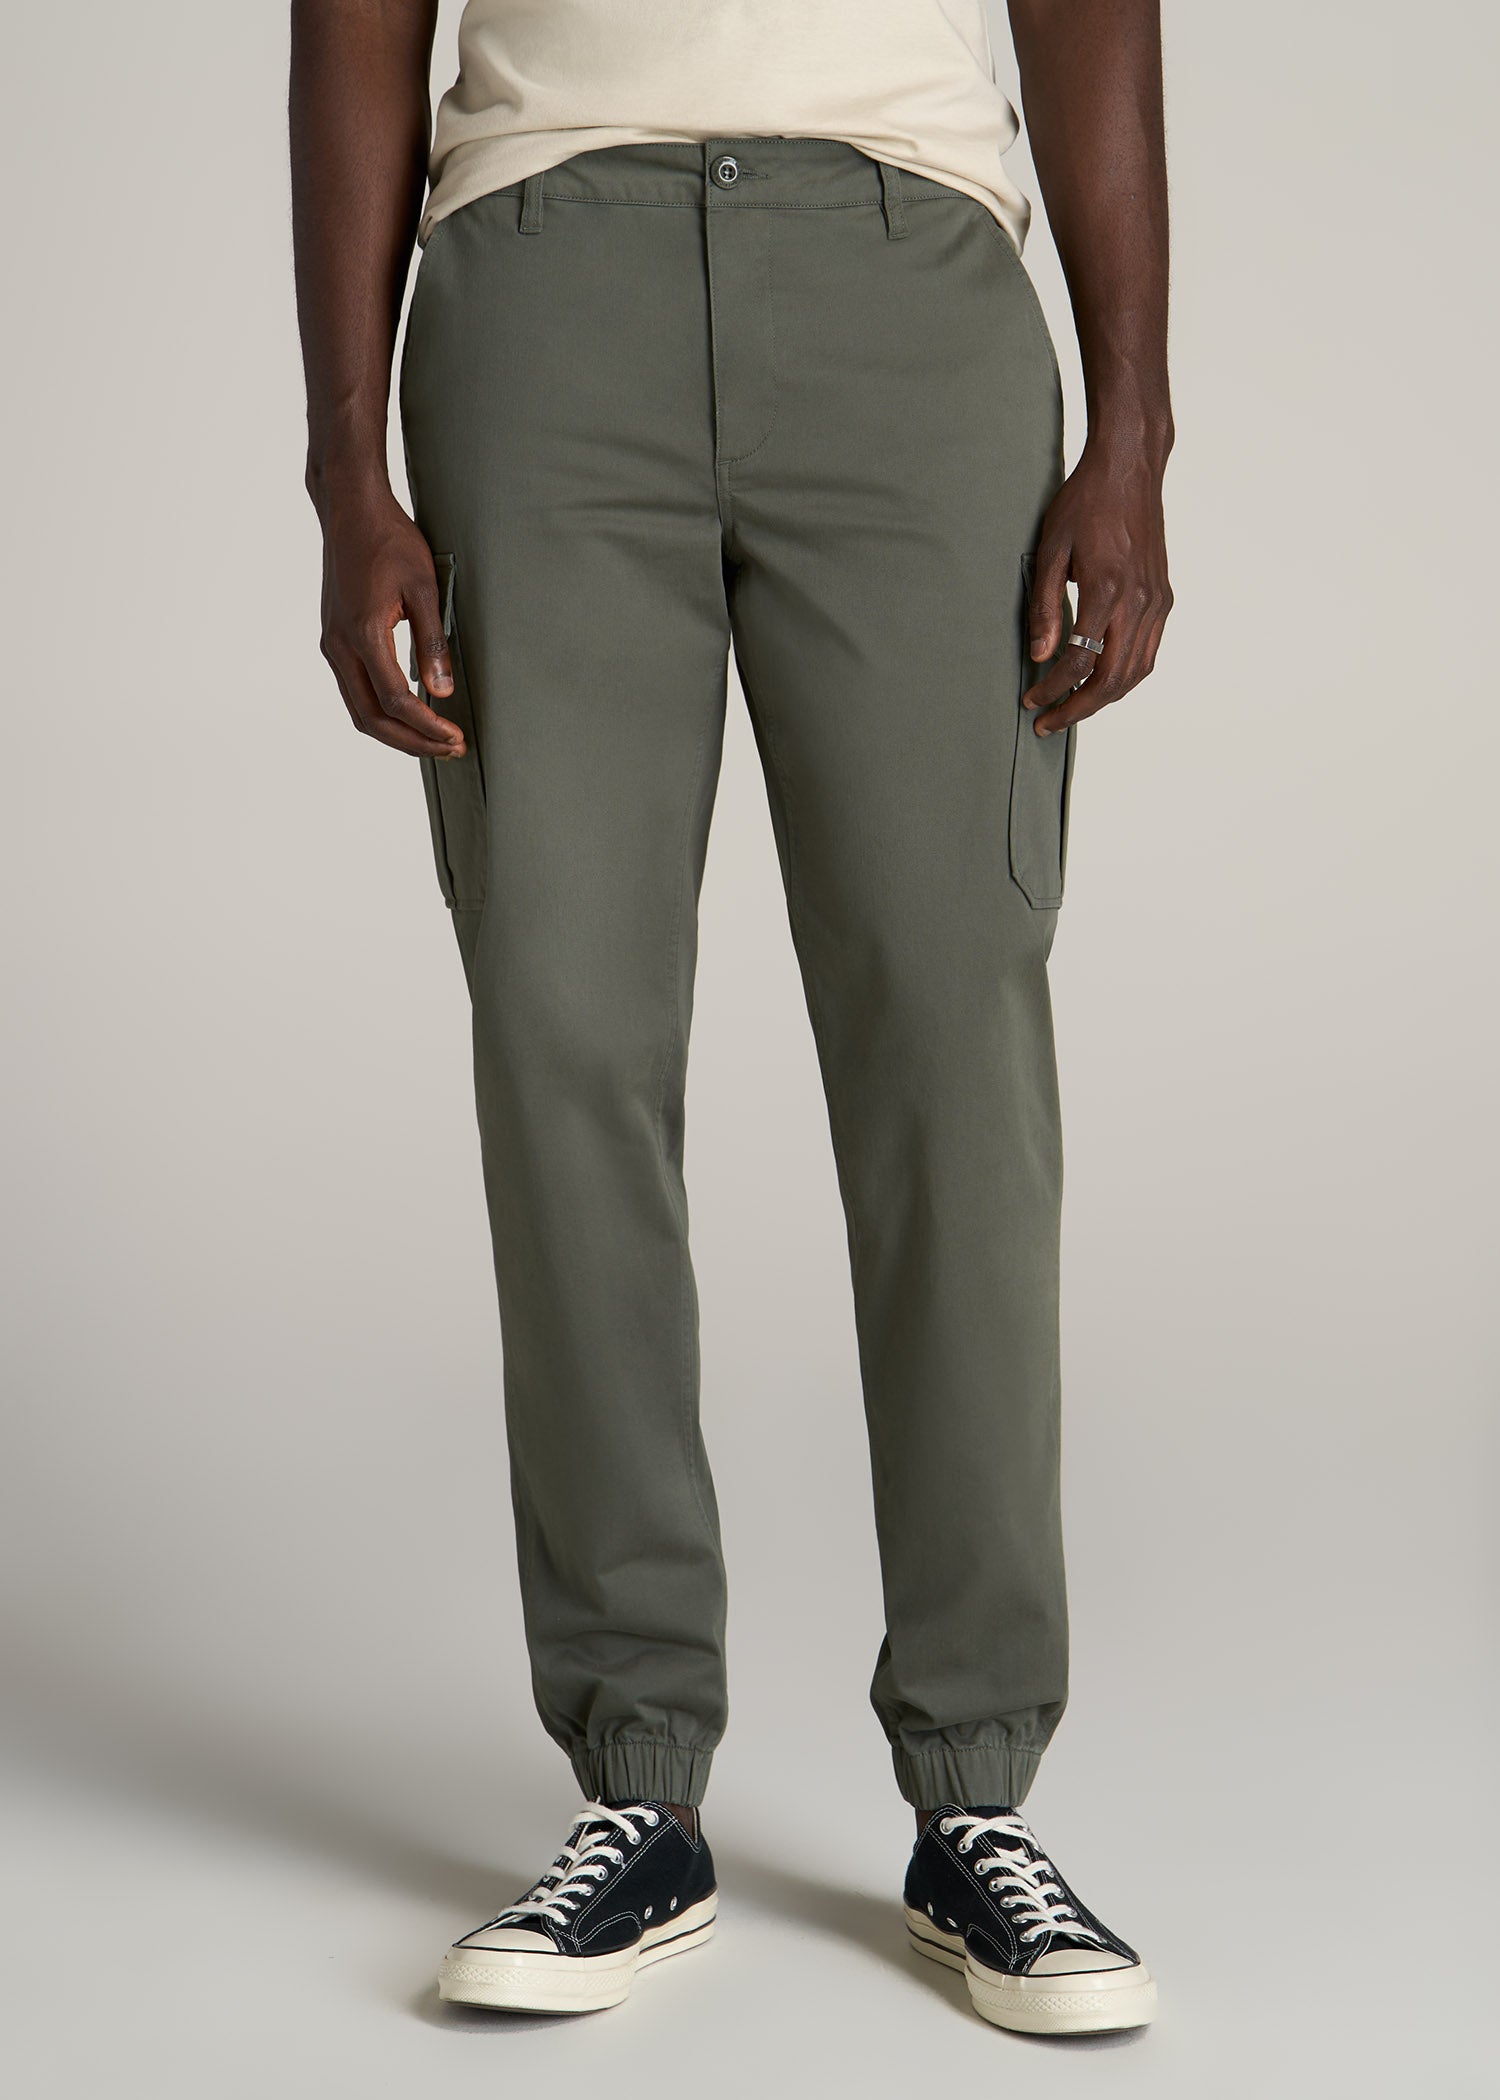 a new day, Pants & Jumpsuits, A New Day Womens Tapered Ankle Cargo Pants  Olive Green Size 4 New